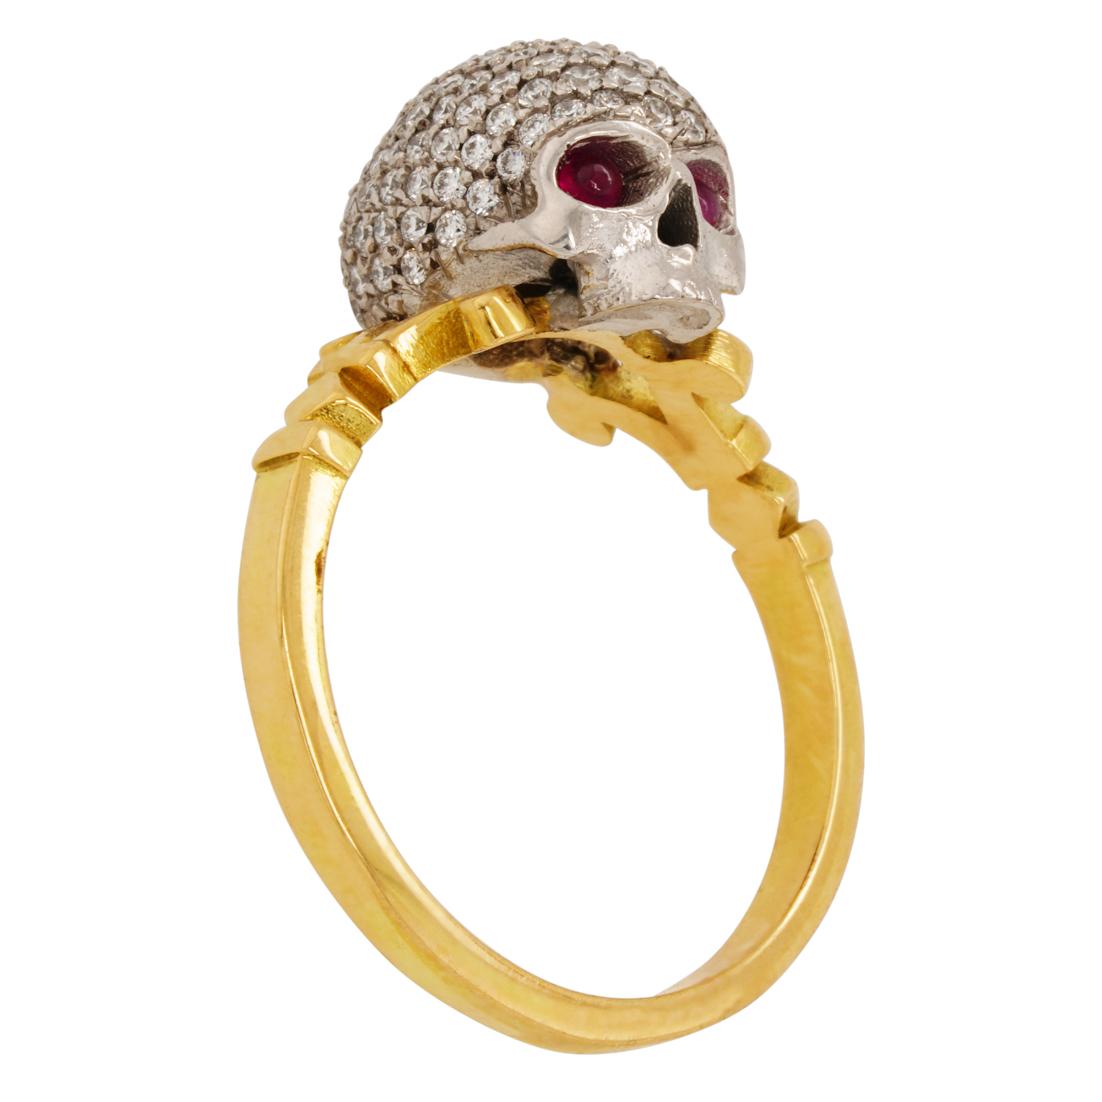 Catacomb Saint Diamond Encrusted Skull Ring in 18kt Gold with Diamonds & Rubies For Sale 5